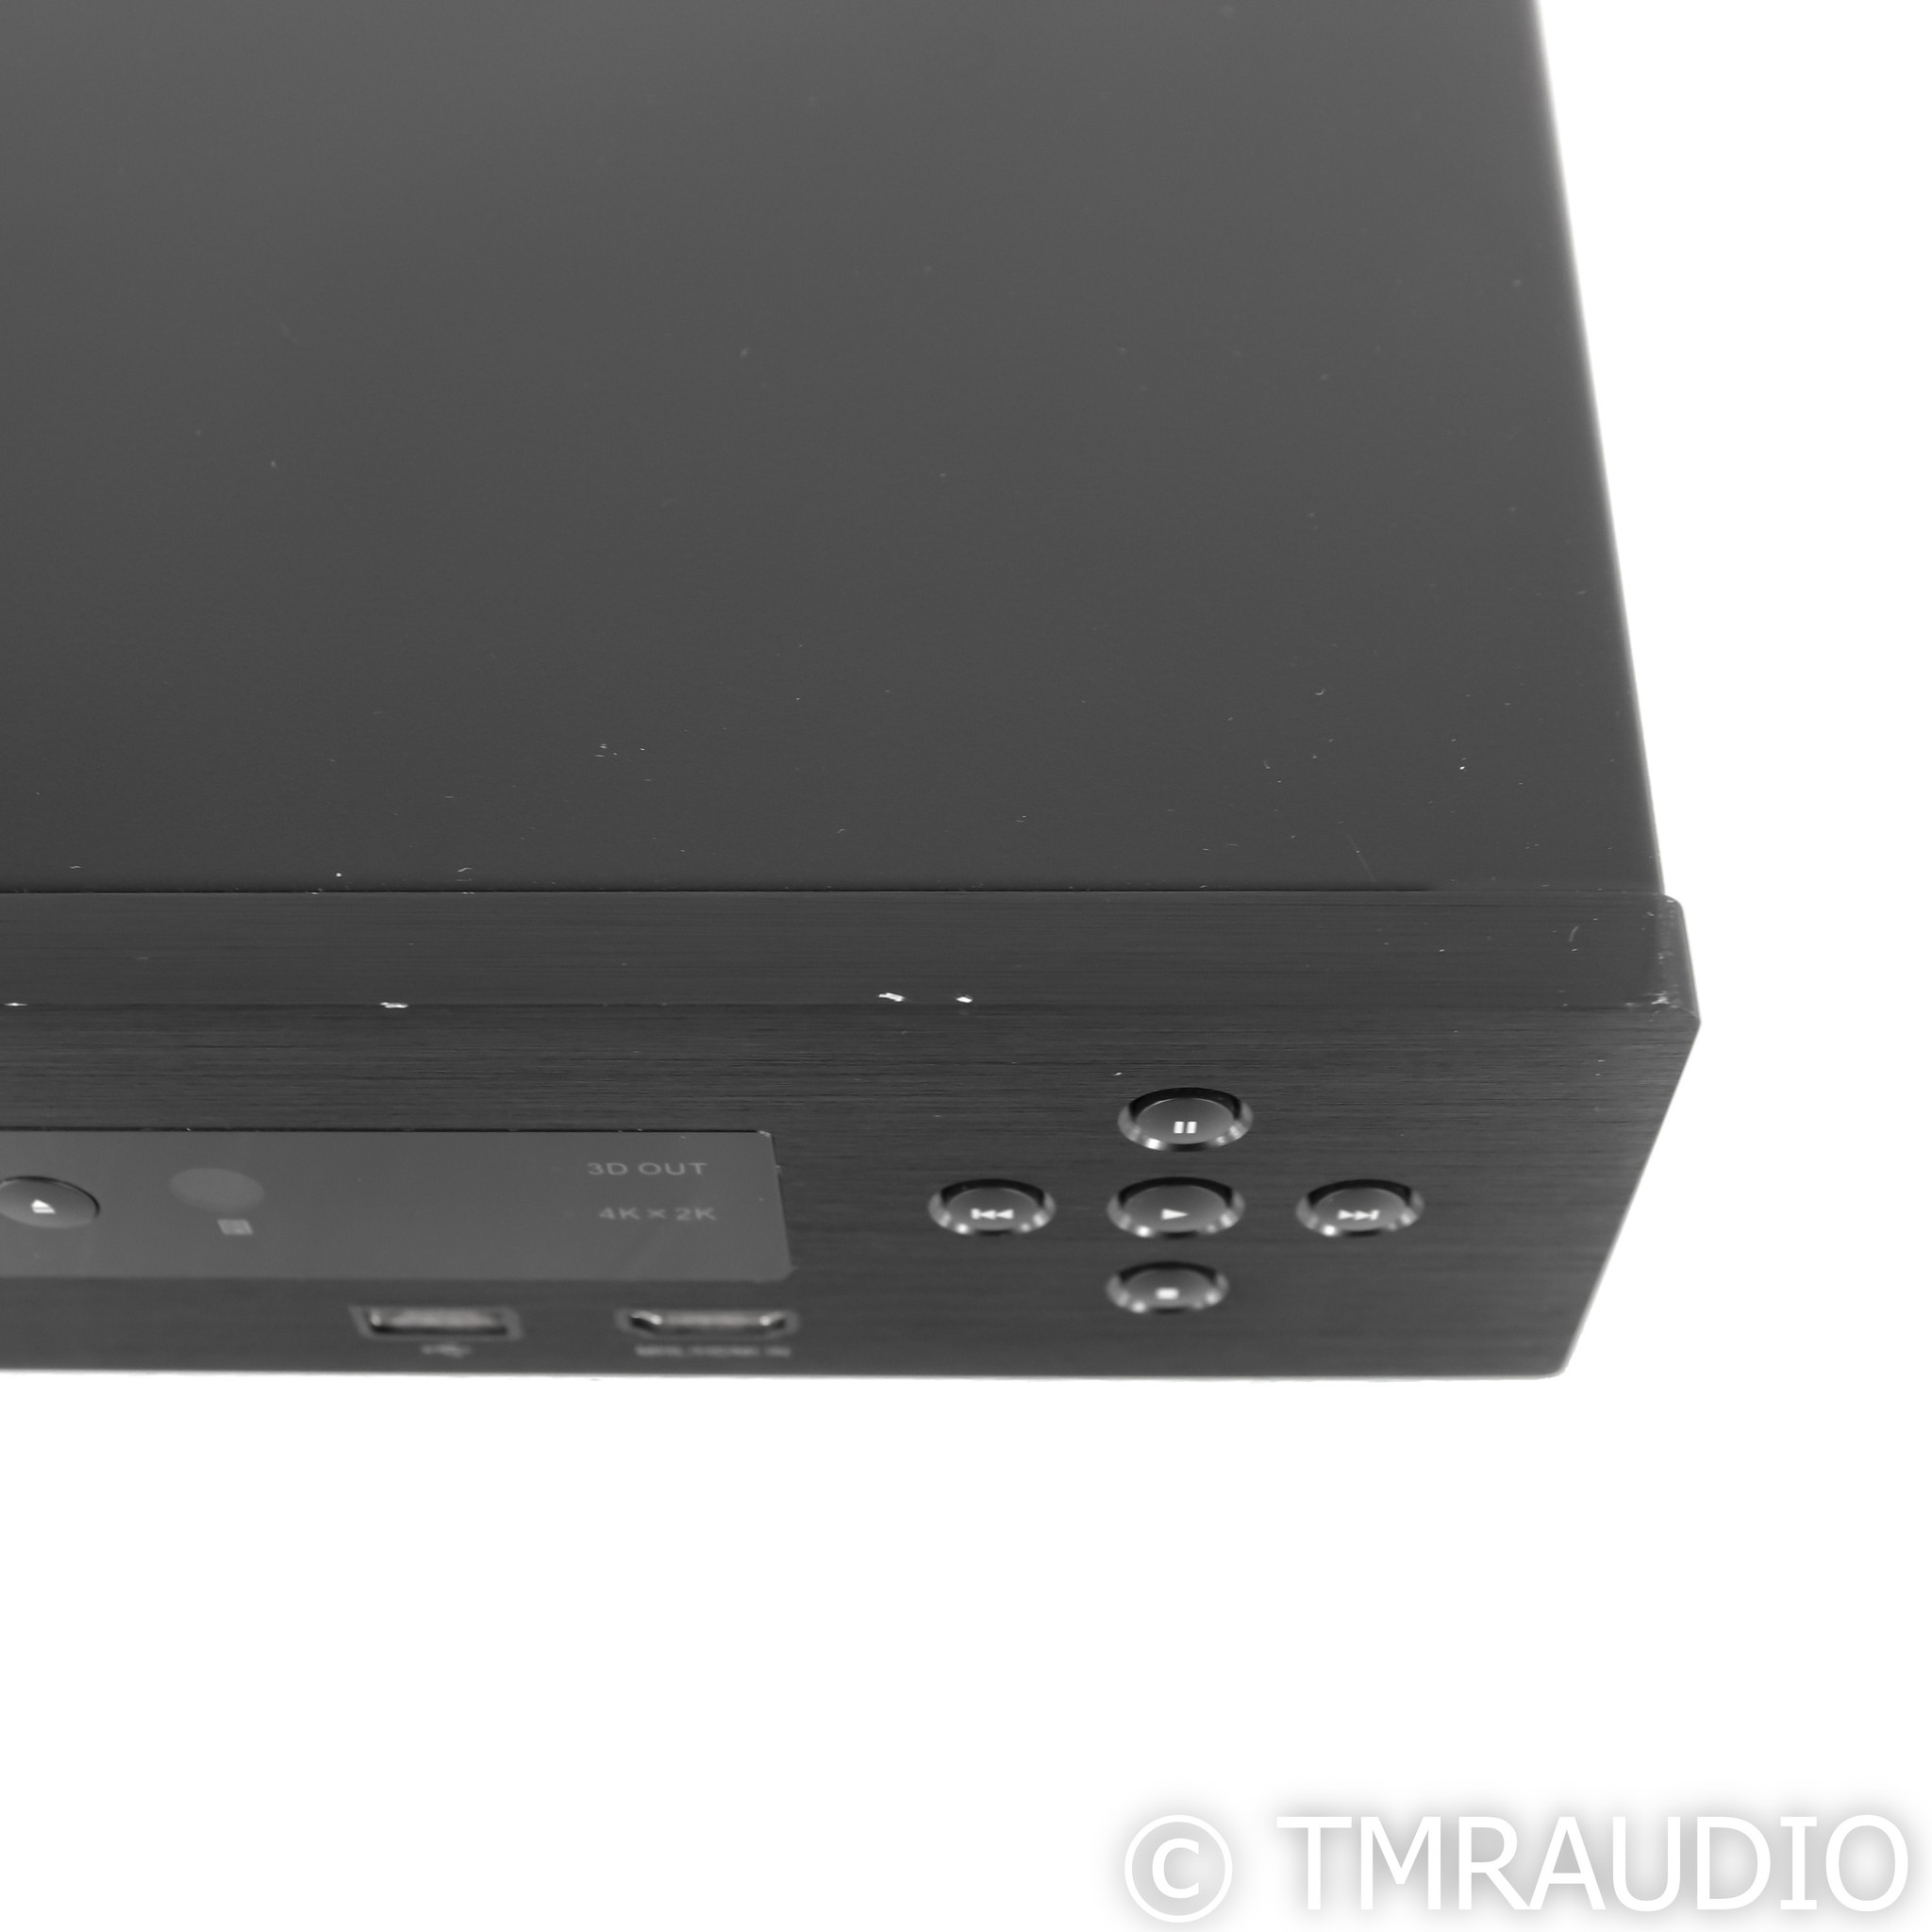 Oppo BDP-103 Universal 3D 4K Blu-ray Player Review